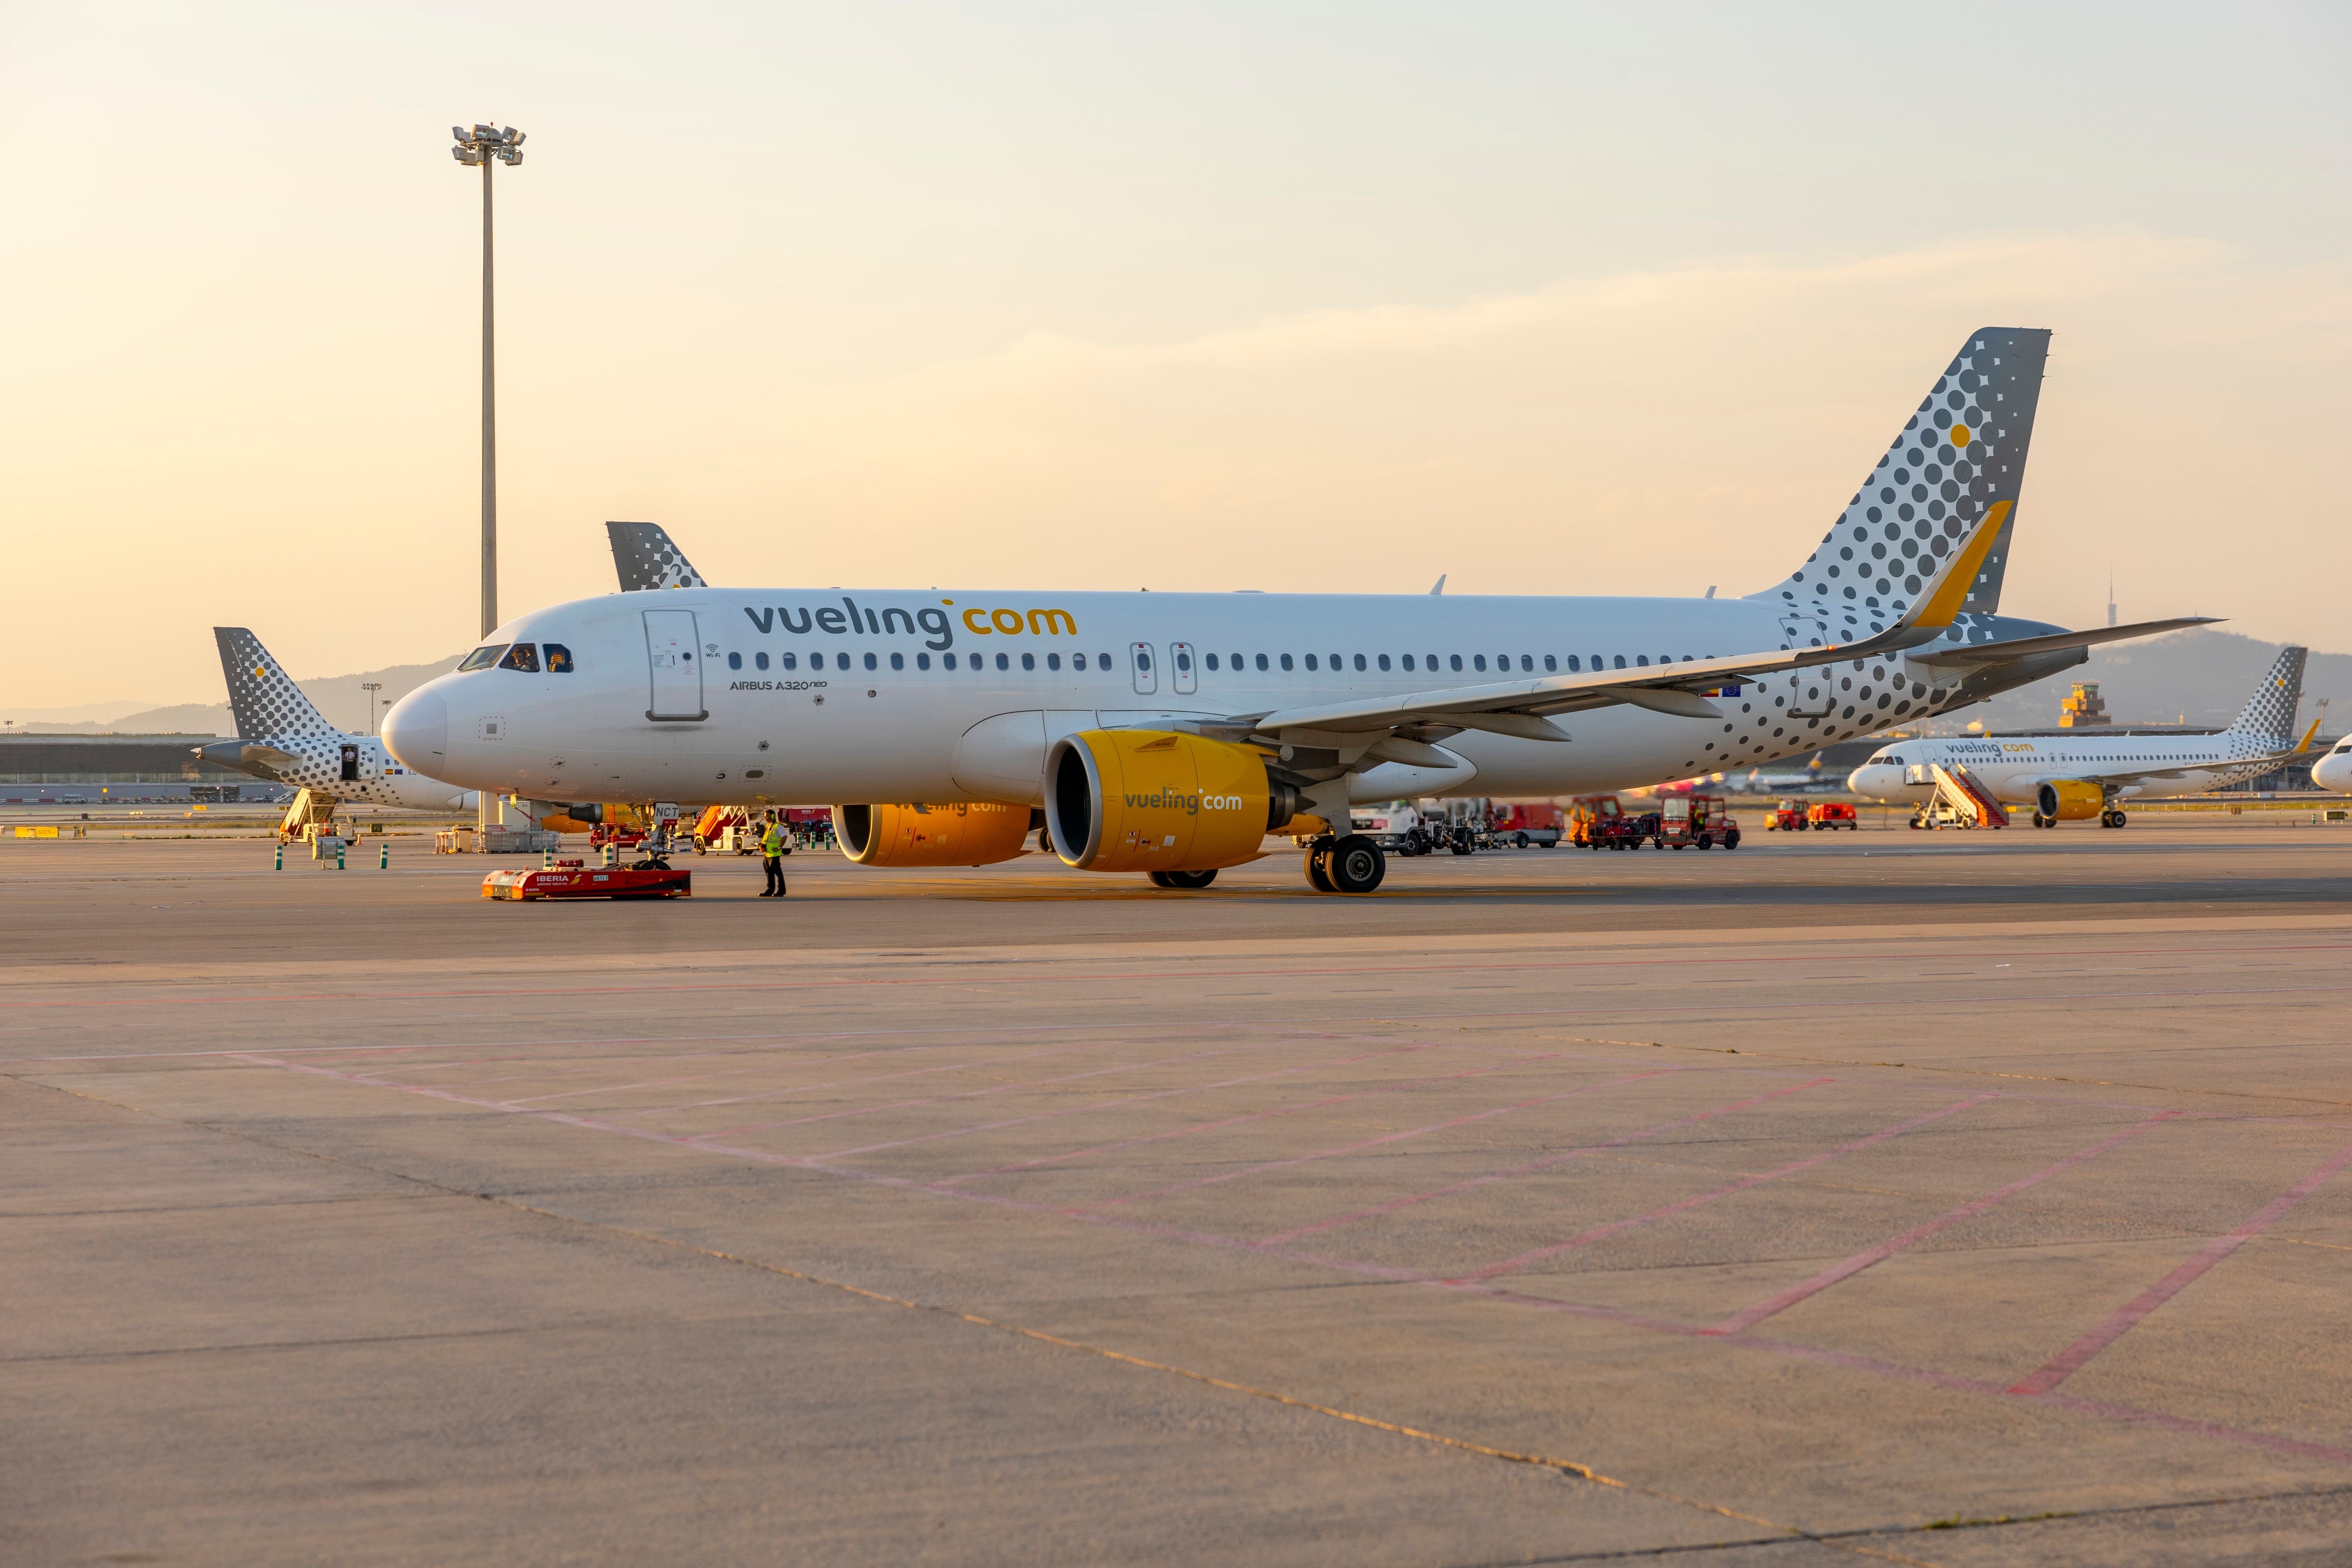 A Vueling Airlines Airbus A320 neo being pushed back.